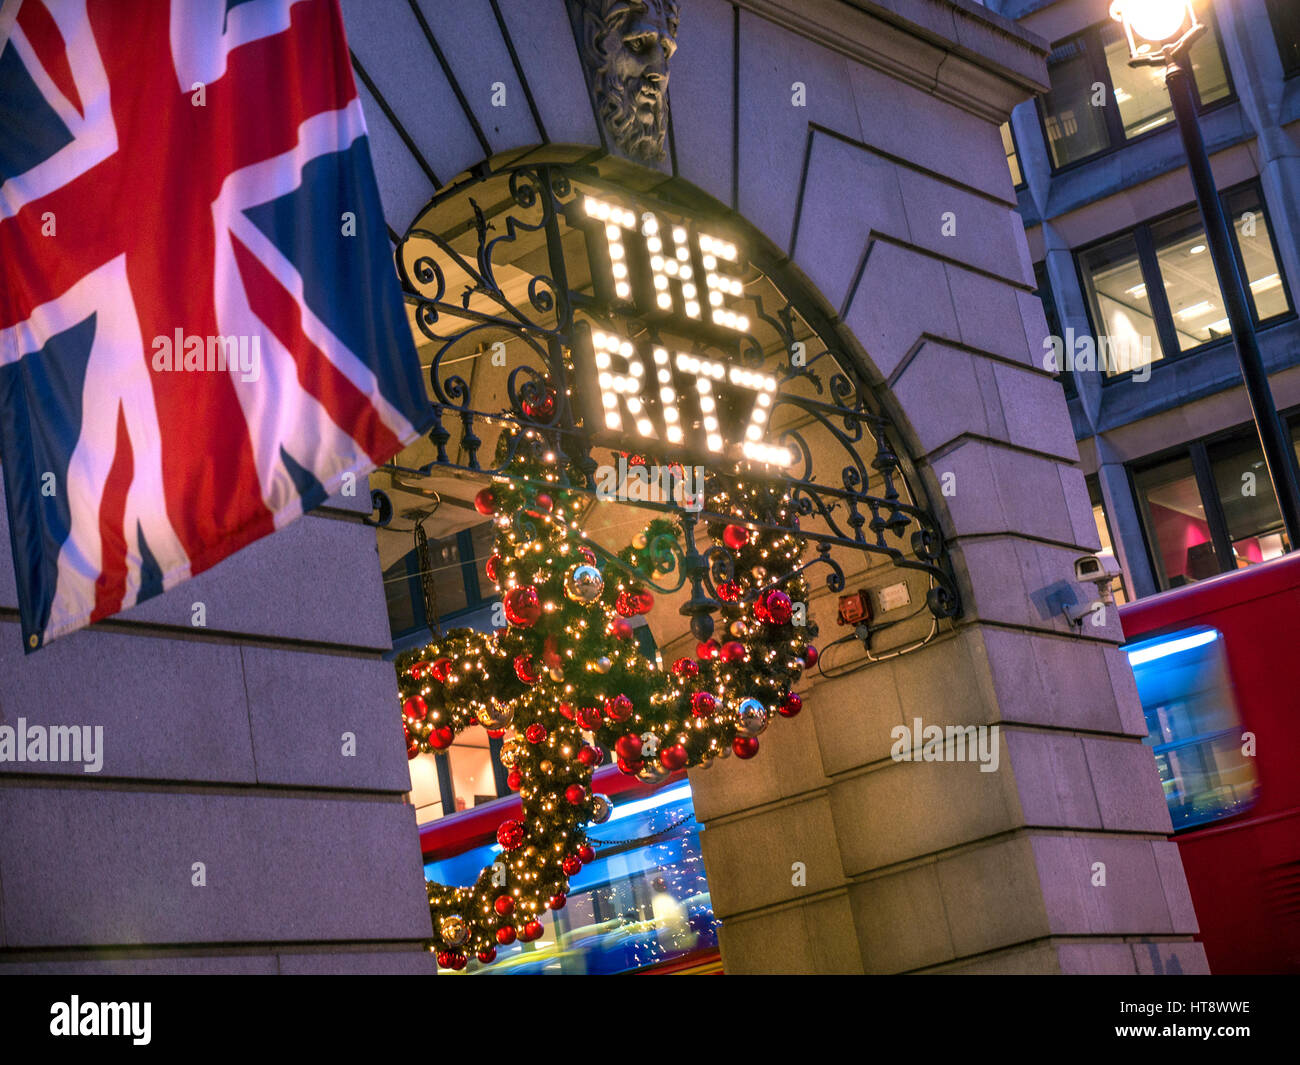 The Ritz Hotel at Christmas time Piccadilly London UK Stock Photo